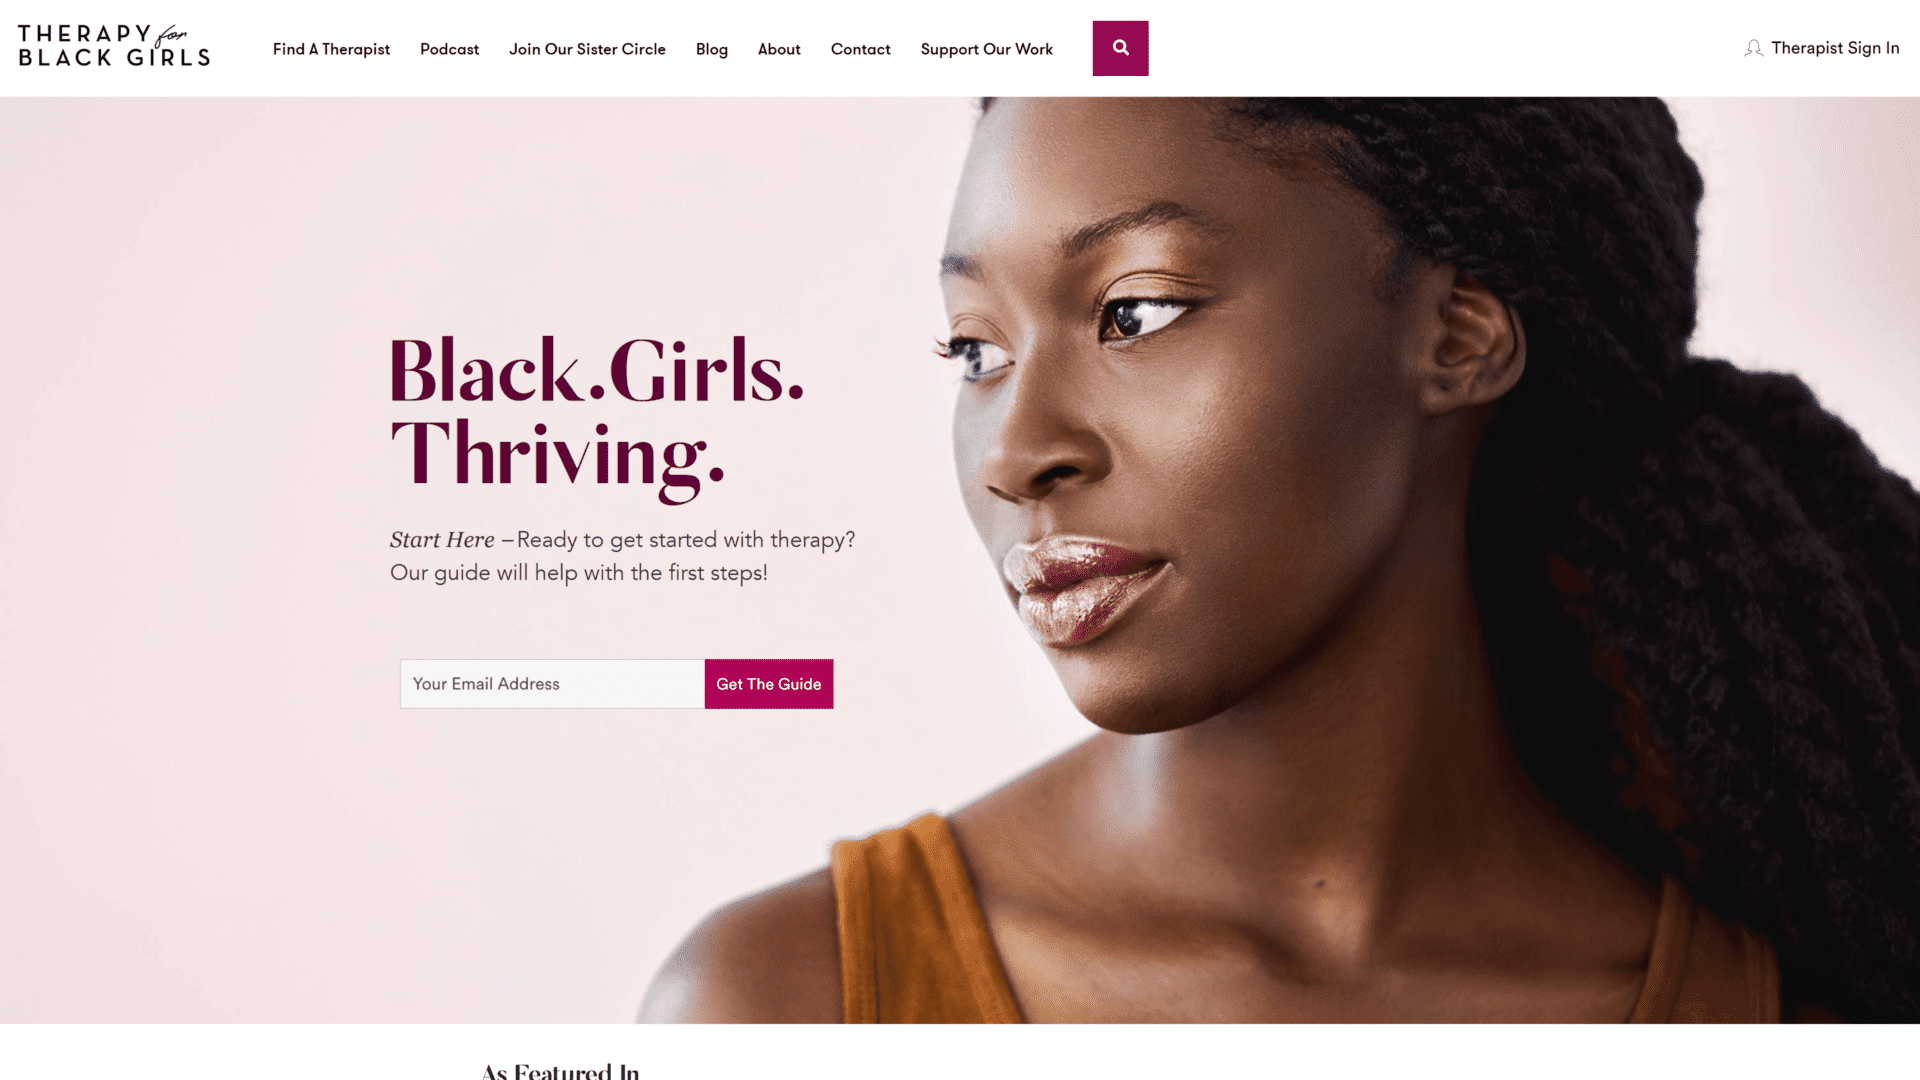 A screenshot of the therapy for black girls homepage